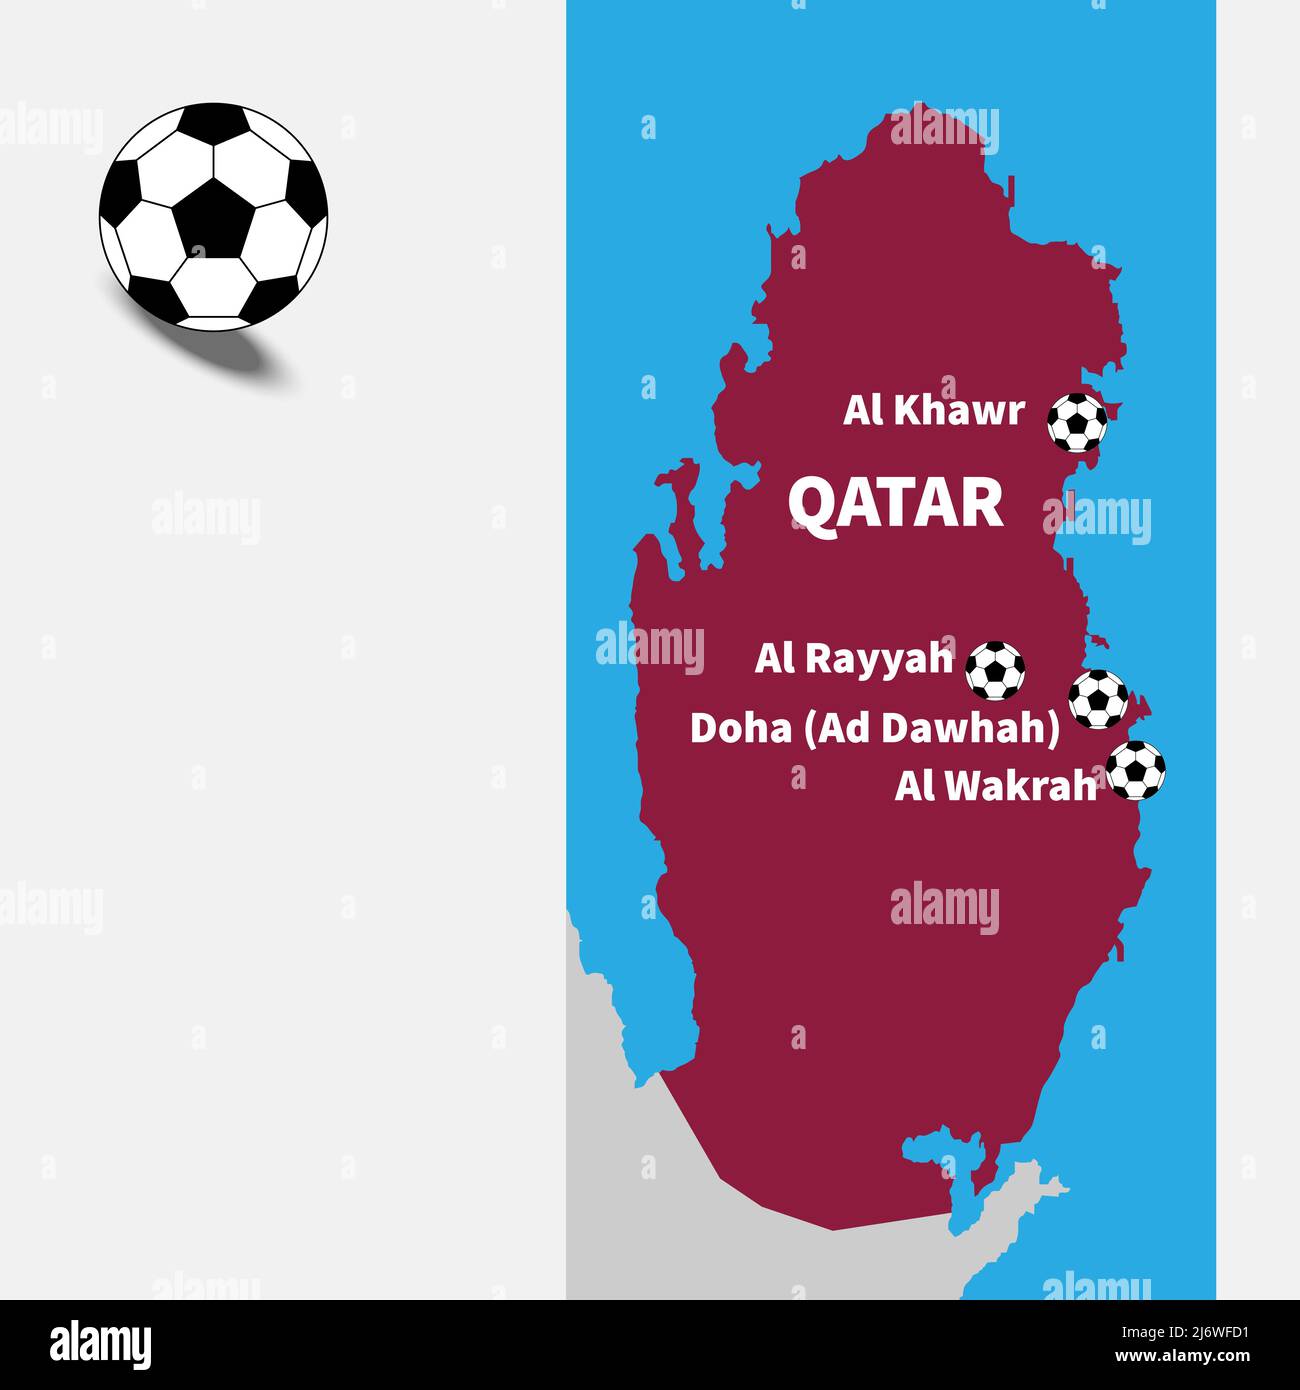 Fifa World Cup Poster Design Template